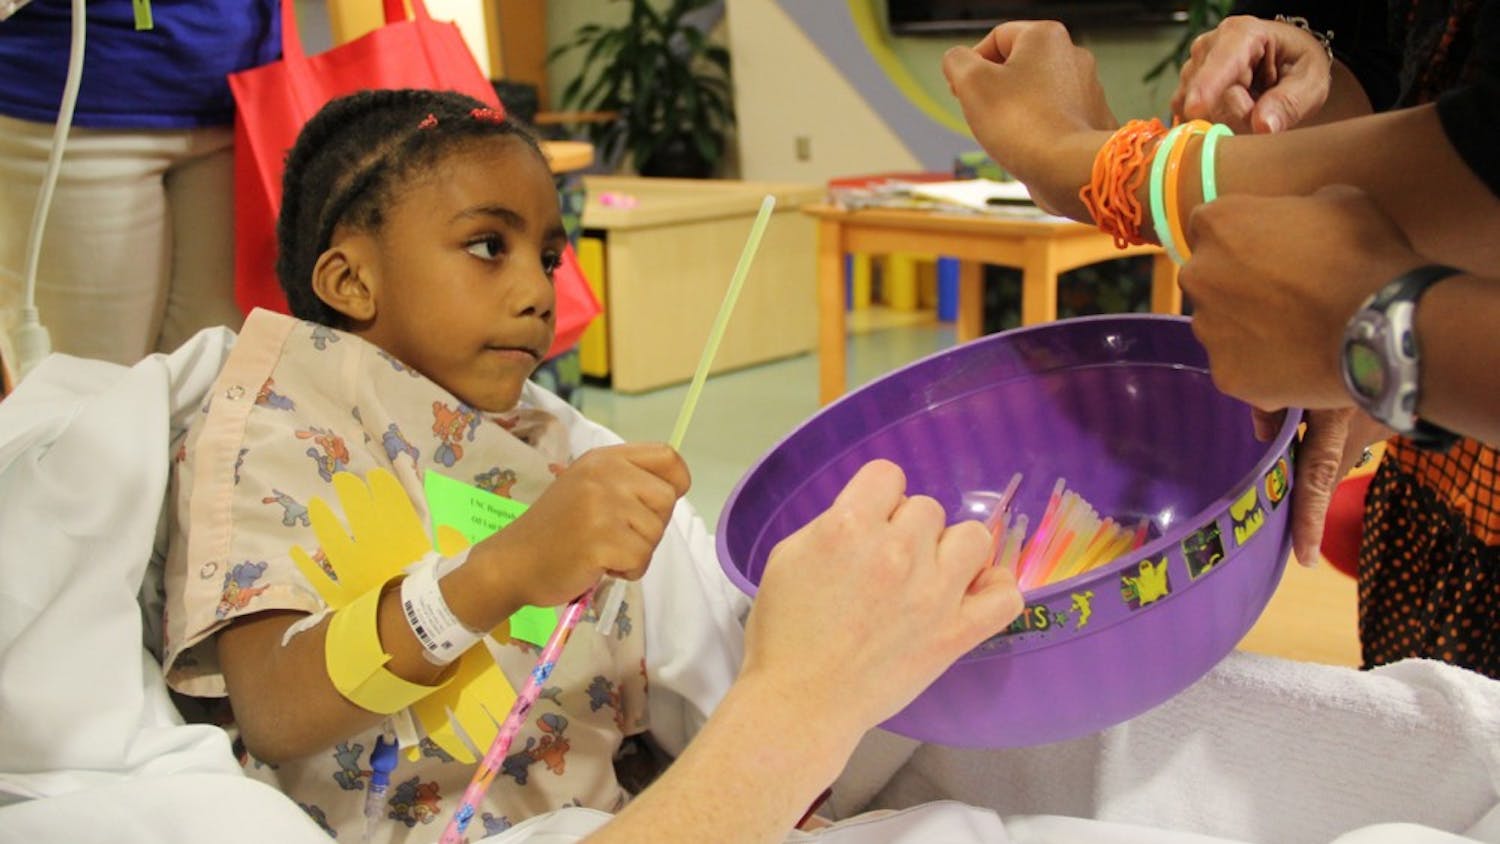 Talyah Askew-Caldwell, 5, chooses a glowstick as she trick or treats the halls of UNC Children's Hospital.